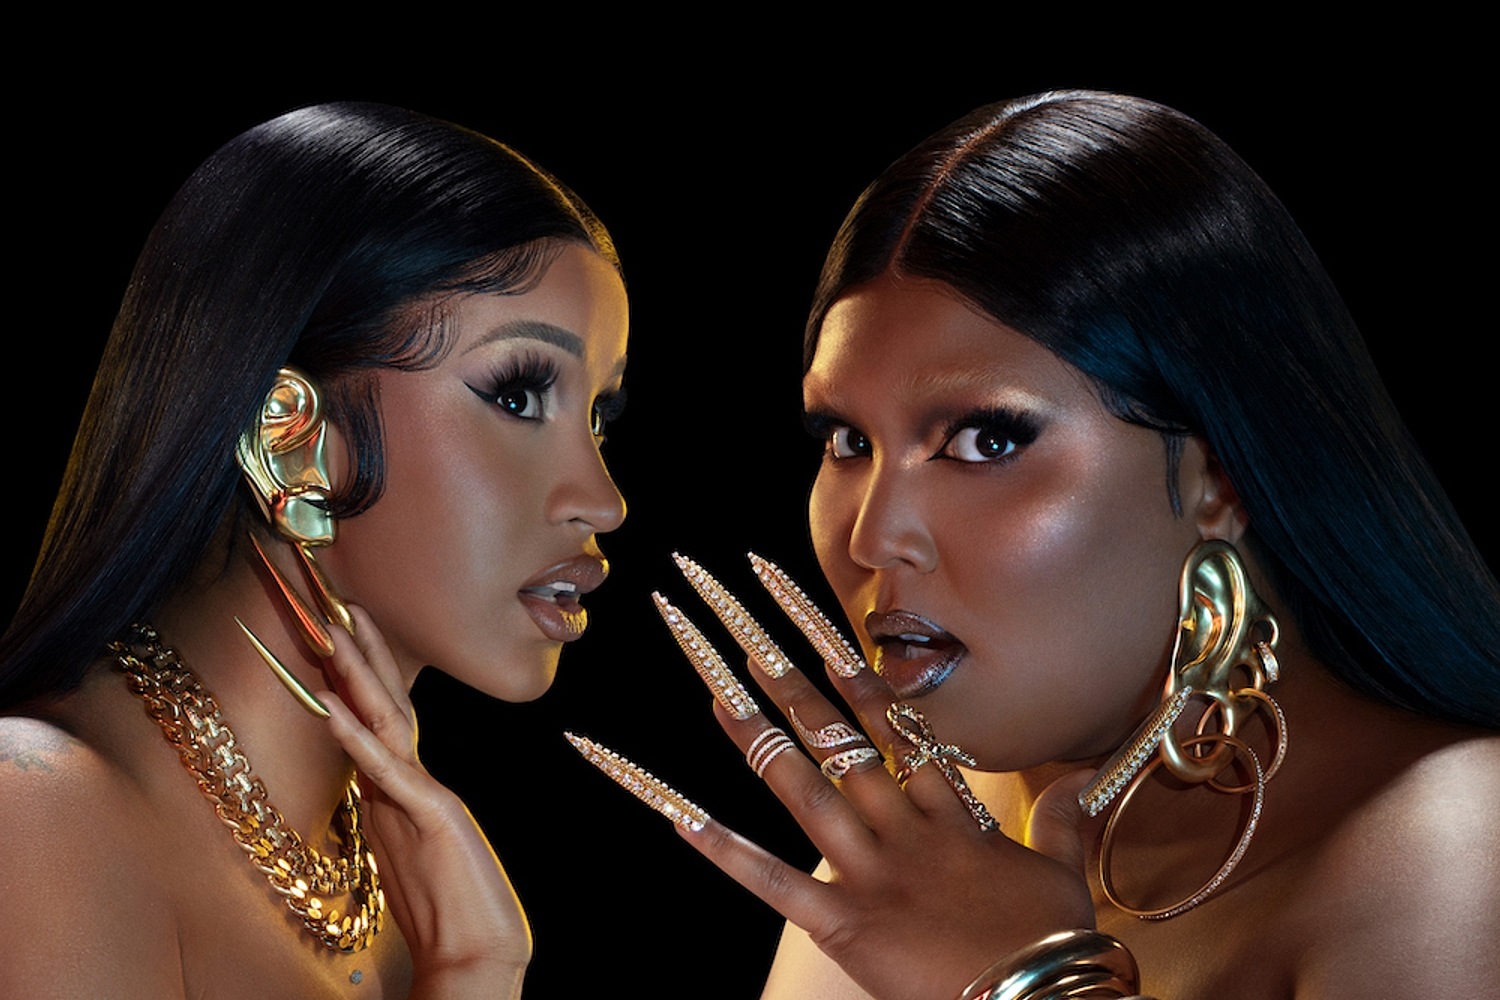 Lizzo and Cardi B join forces for ‘Rumors’